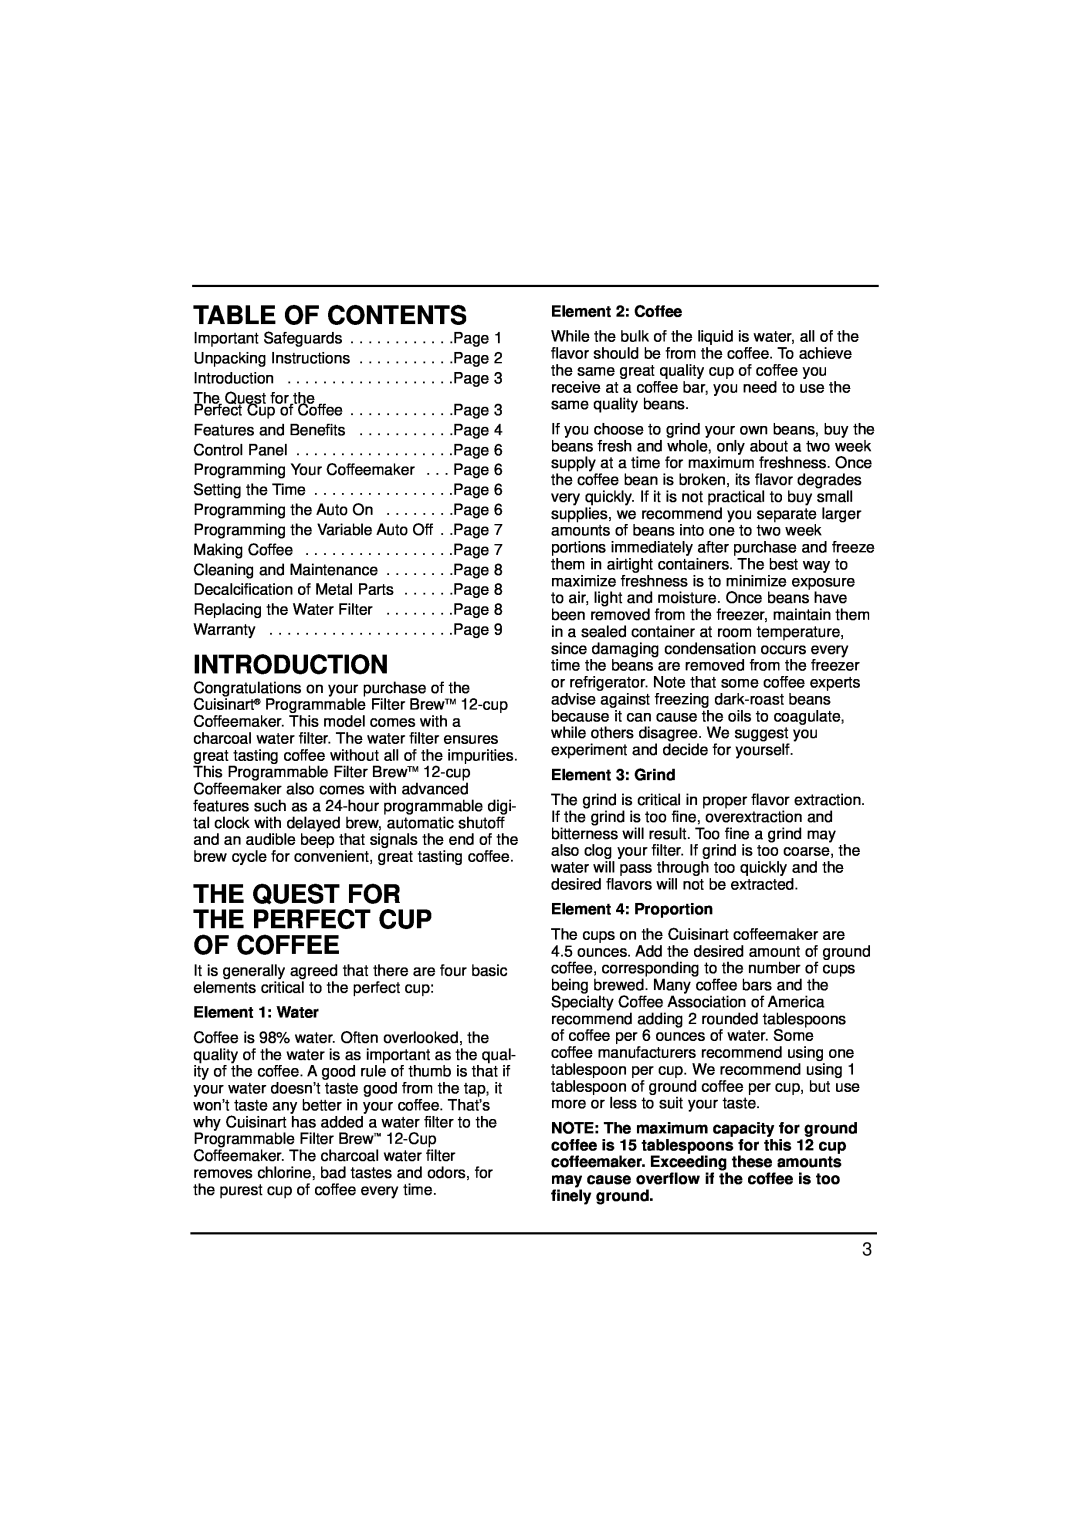 Cuisinart DCC-1000, 73289 manual Table Of Contents, Introduction, The Quest For The Perfect Cup Of Coffee, Element 1 Water 